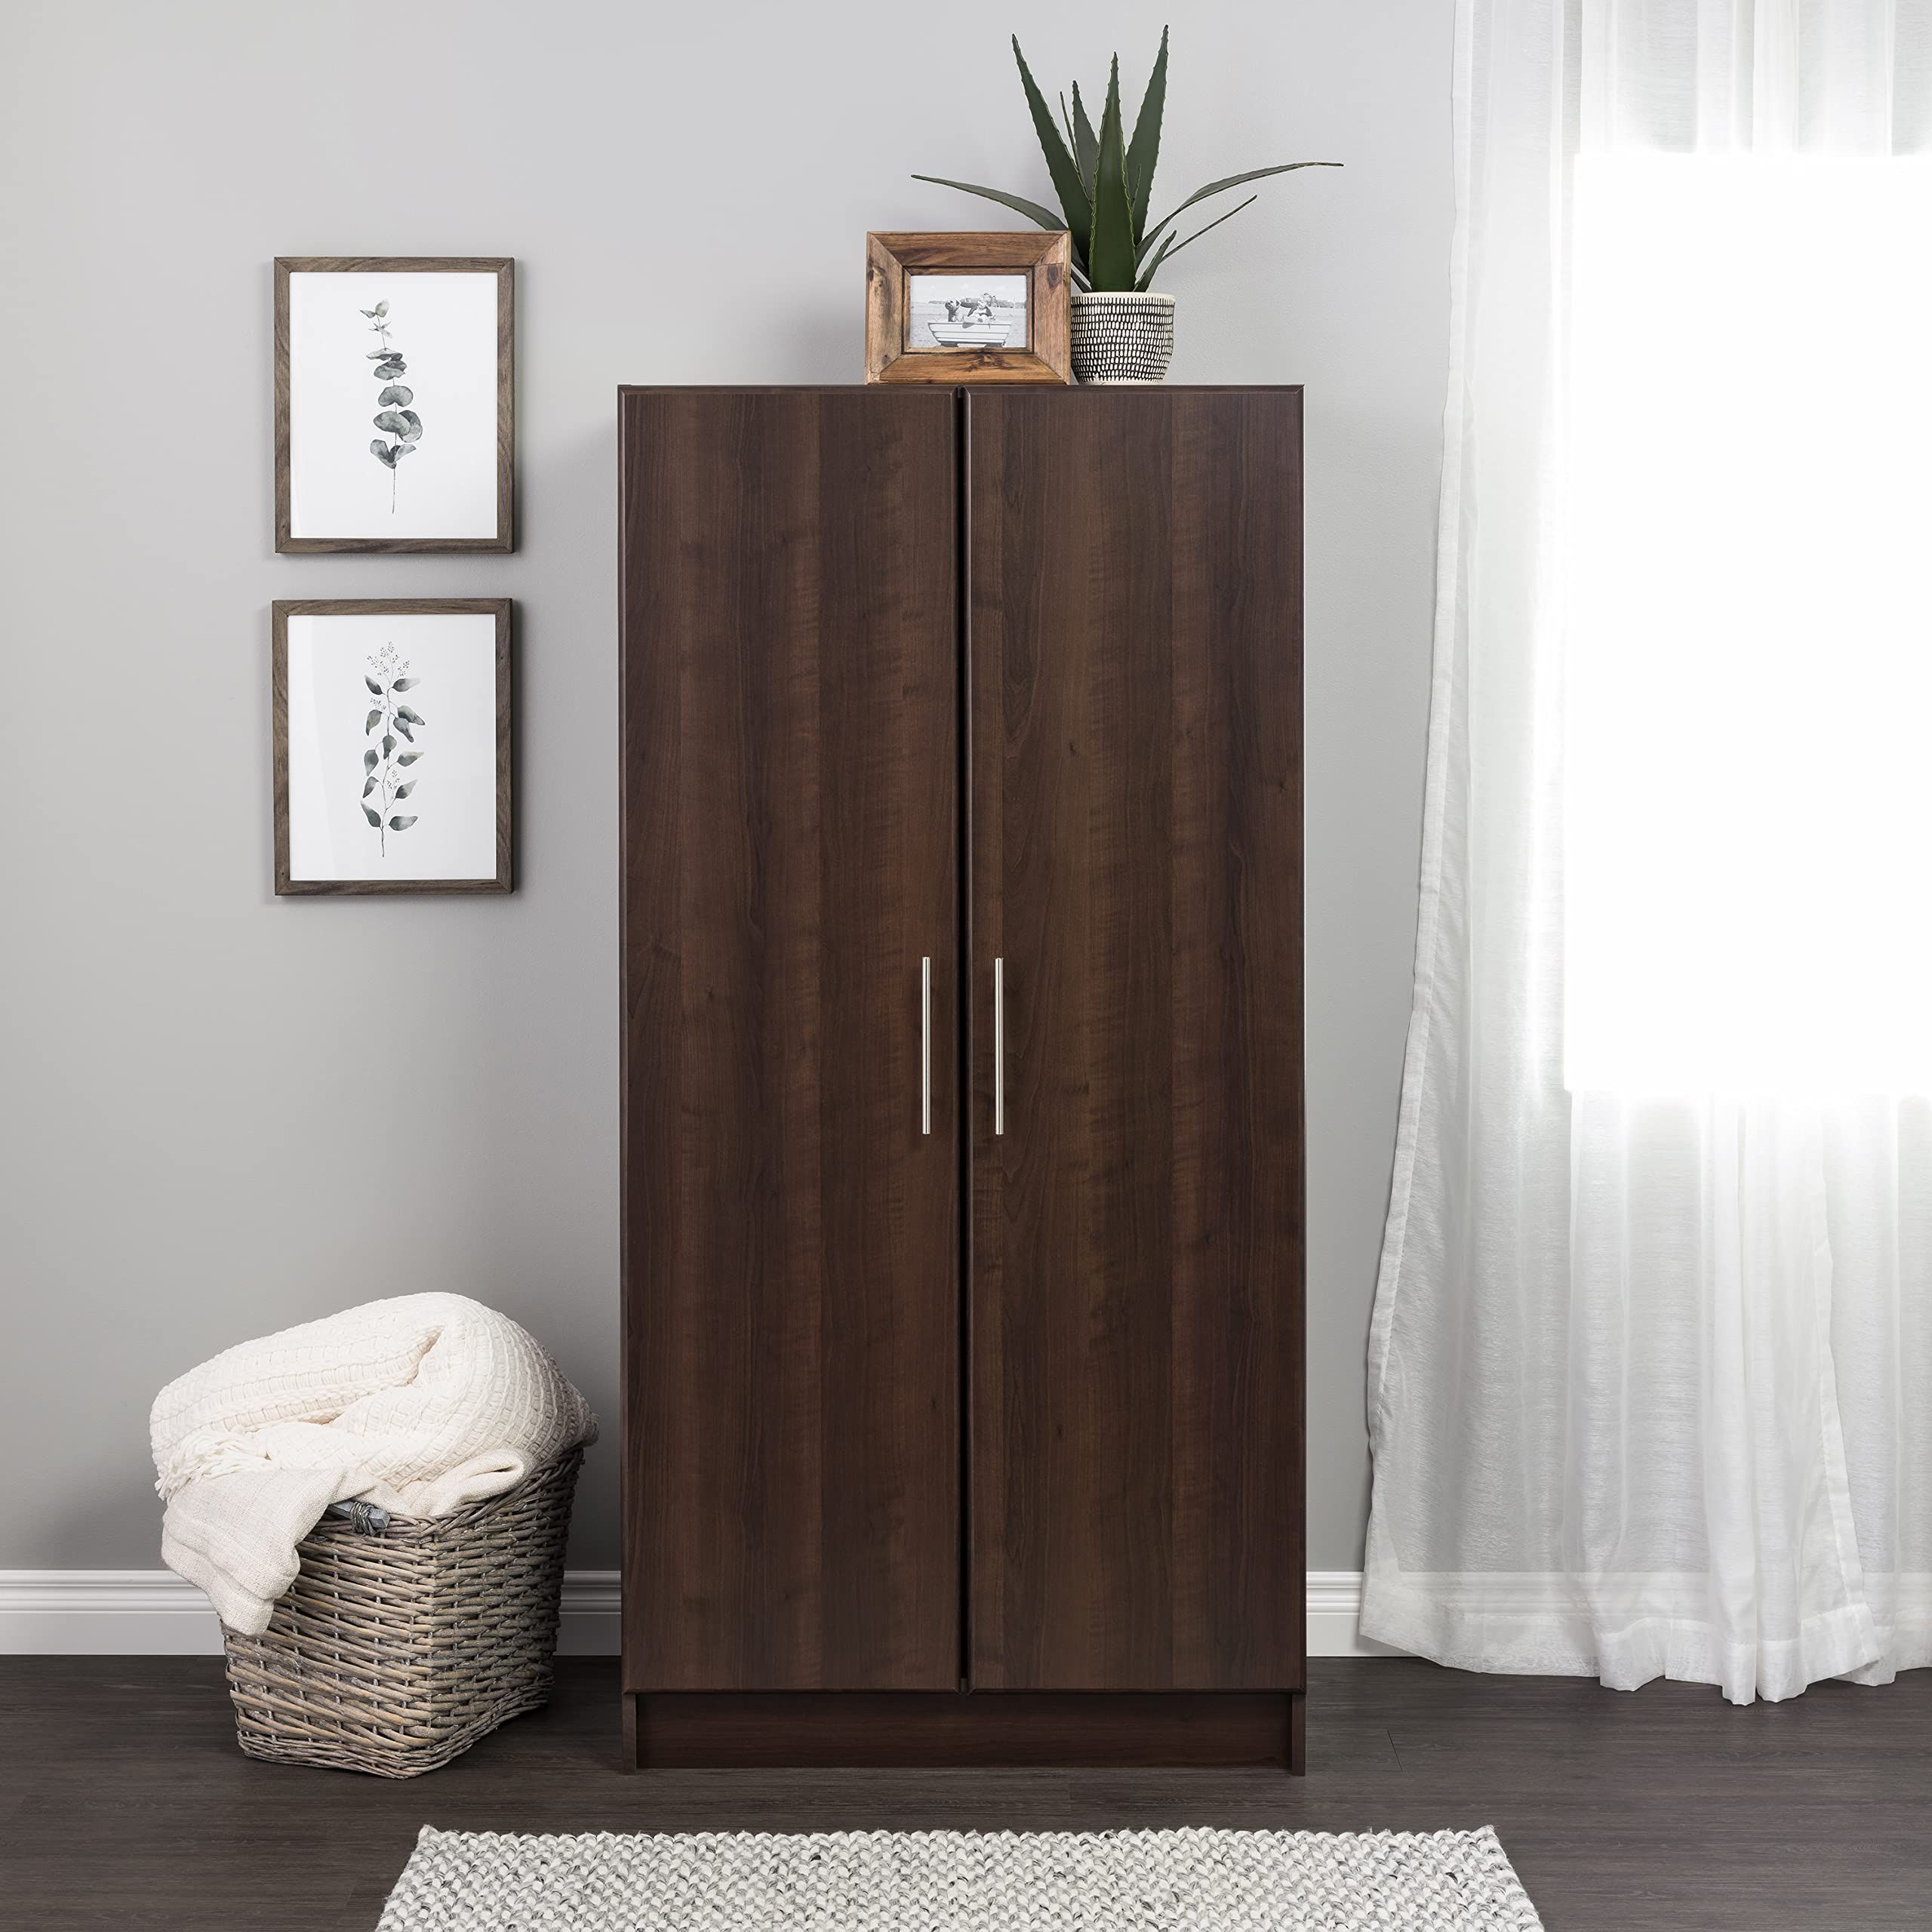 Espresso Wardrobes In Famous Amazon: Prepac Elite Functional Wardrobe Closet With Hanging Rail And  Shelves, Simplistic 2 Door Armoire Portable Closet 21" D X 32" W X 65" H,  Espresso, Eesw 3264 K : Home & Kitchen (Photo 2 of 10)